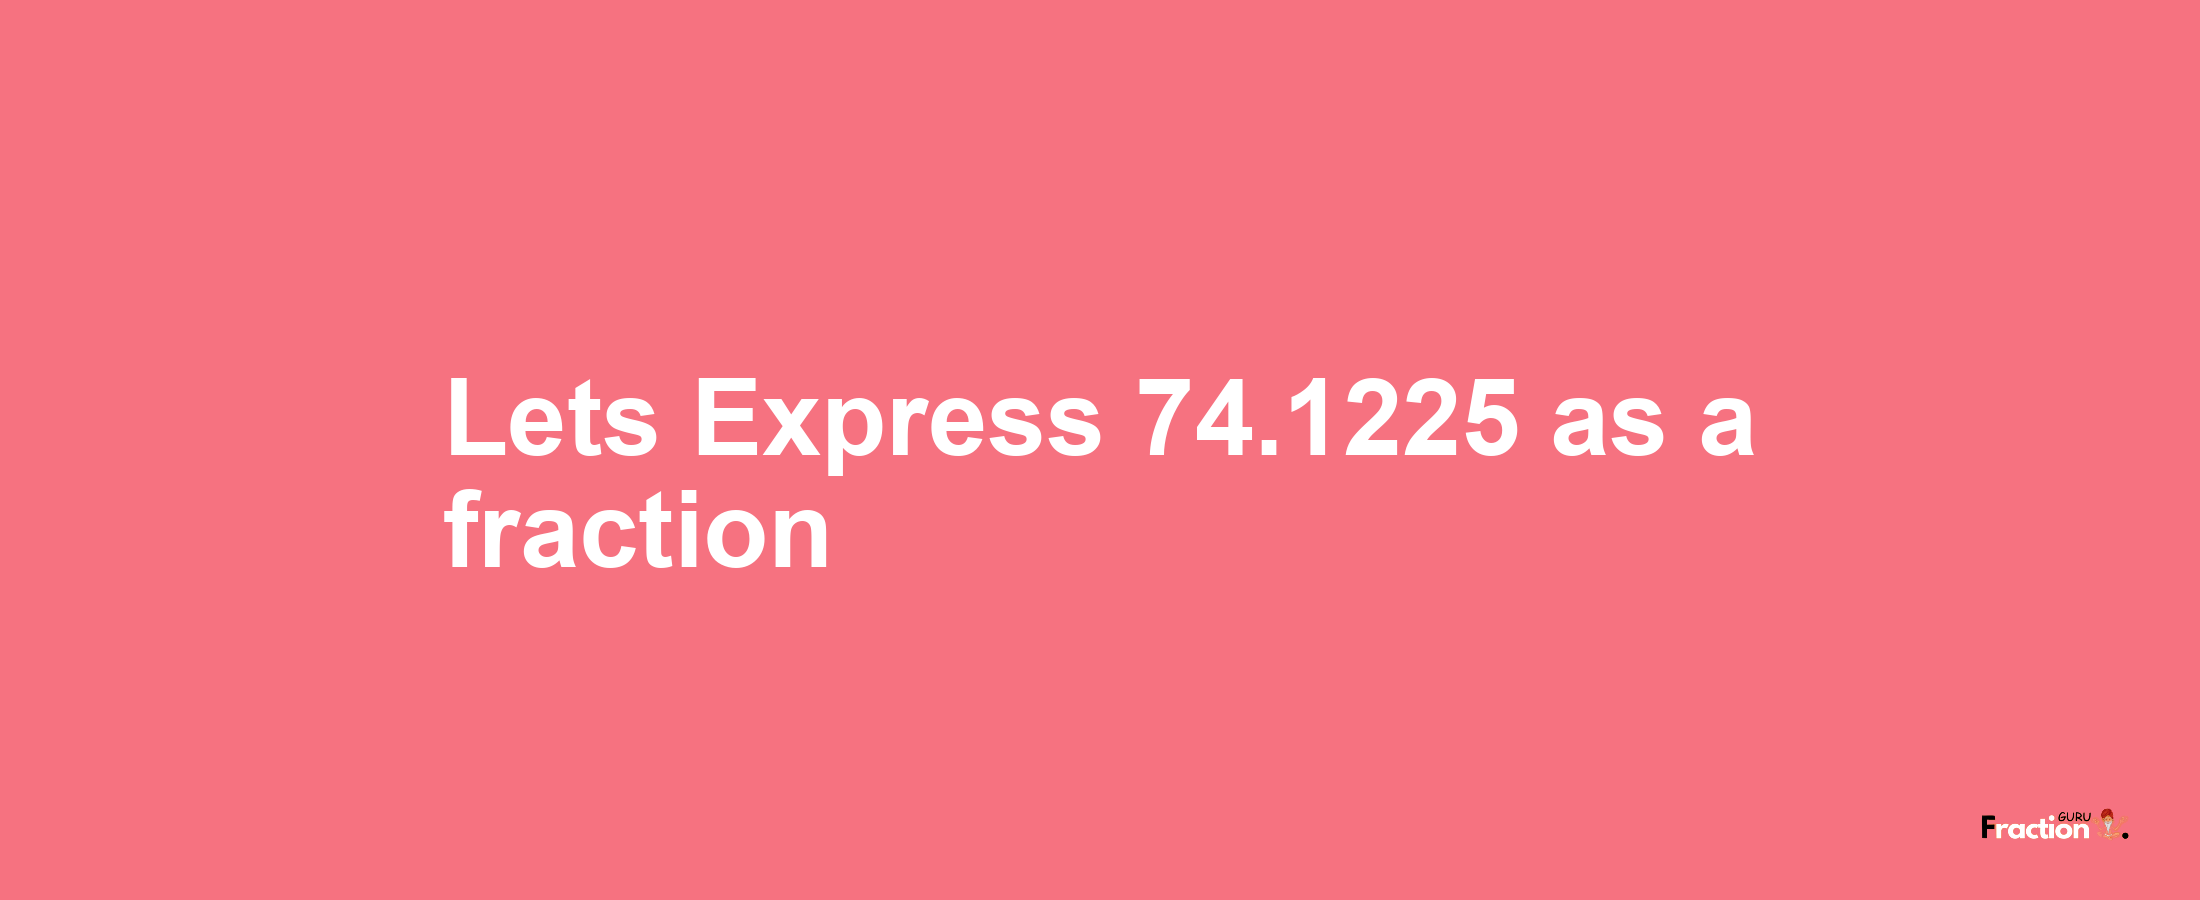 Lets Express 74.1225 as afraction